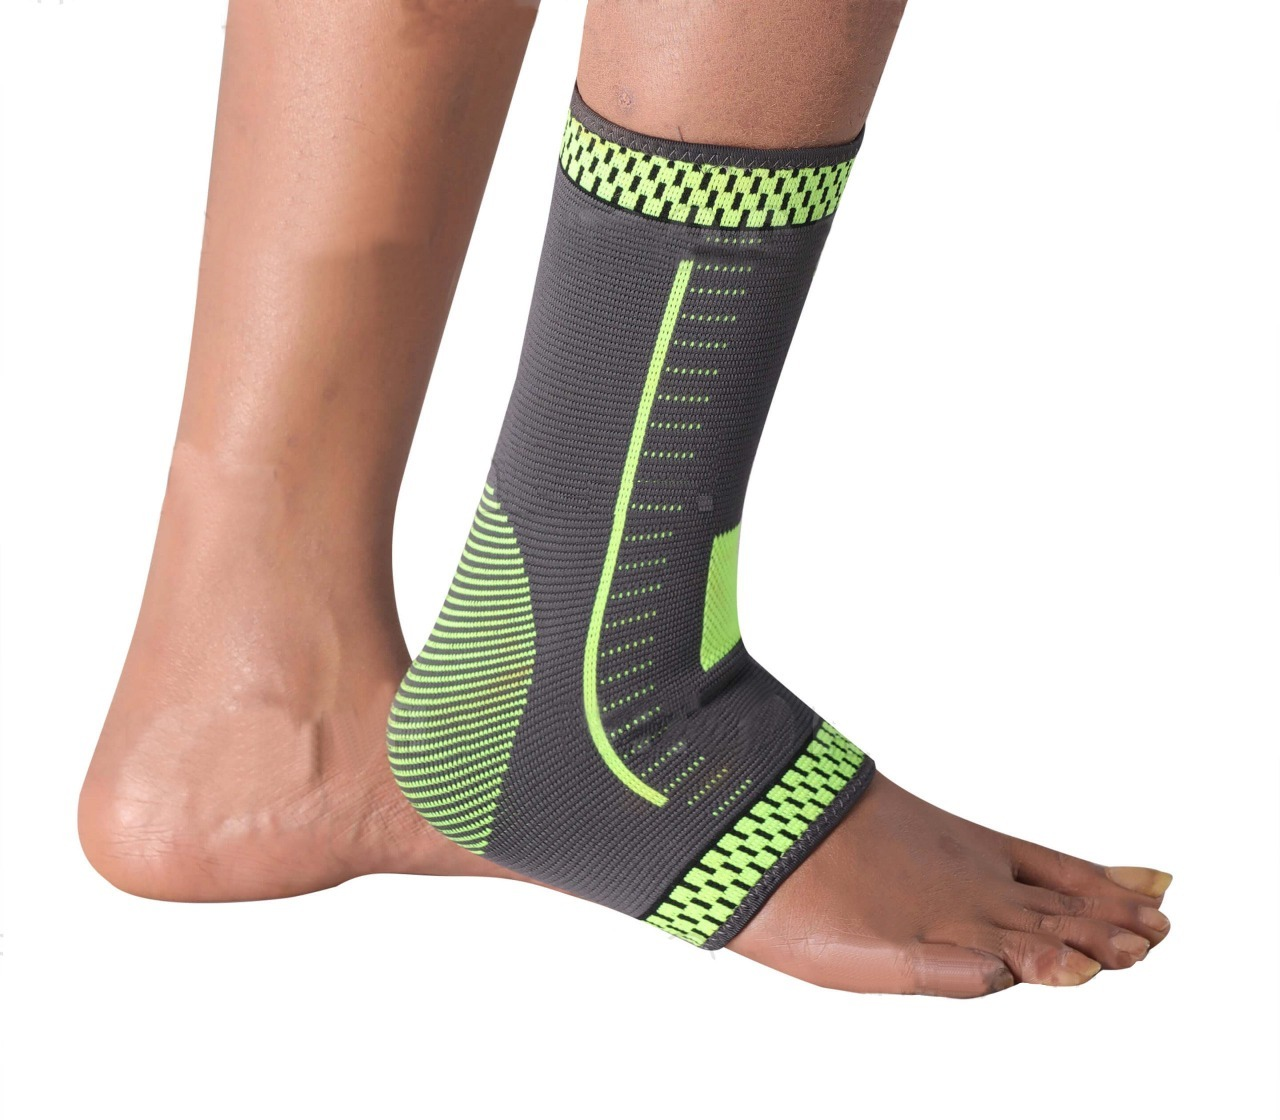 Orthosis ankle support in Pakistan